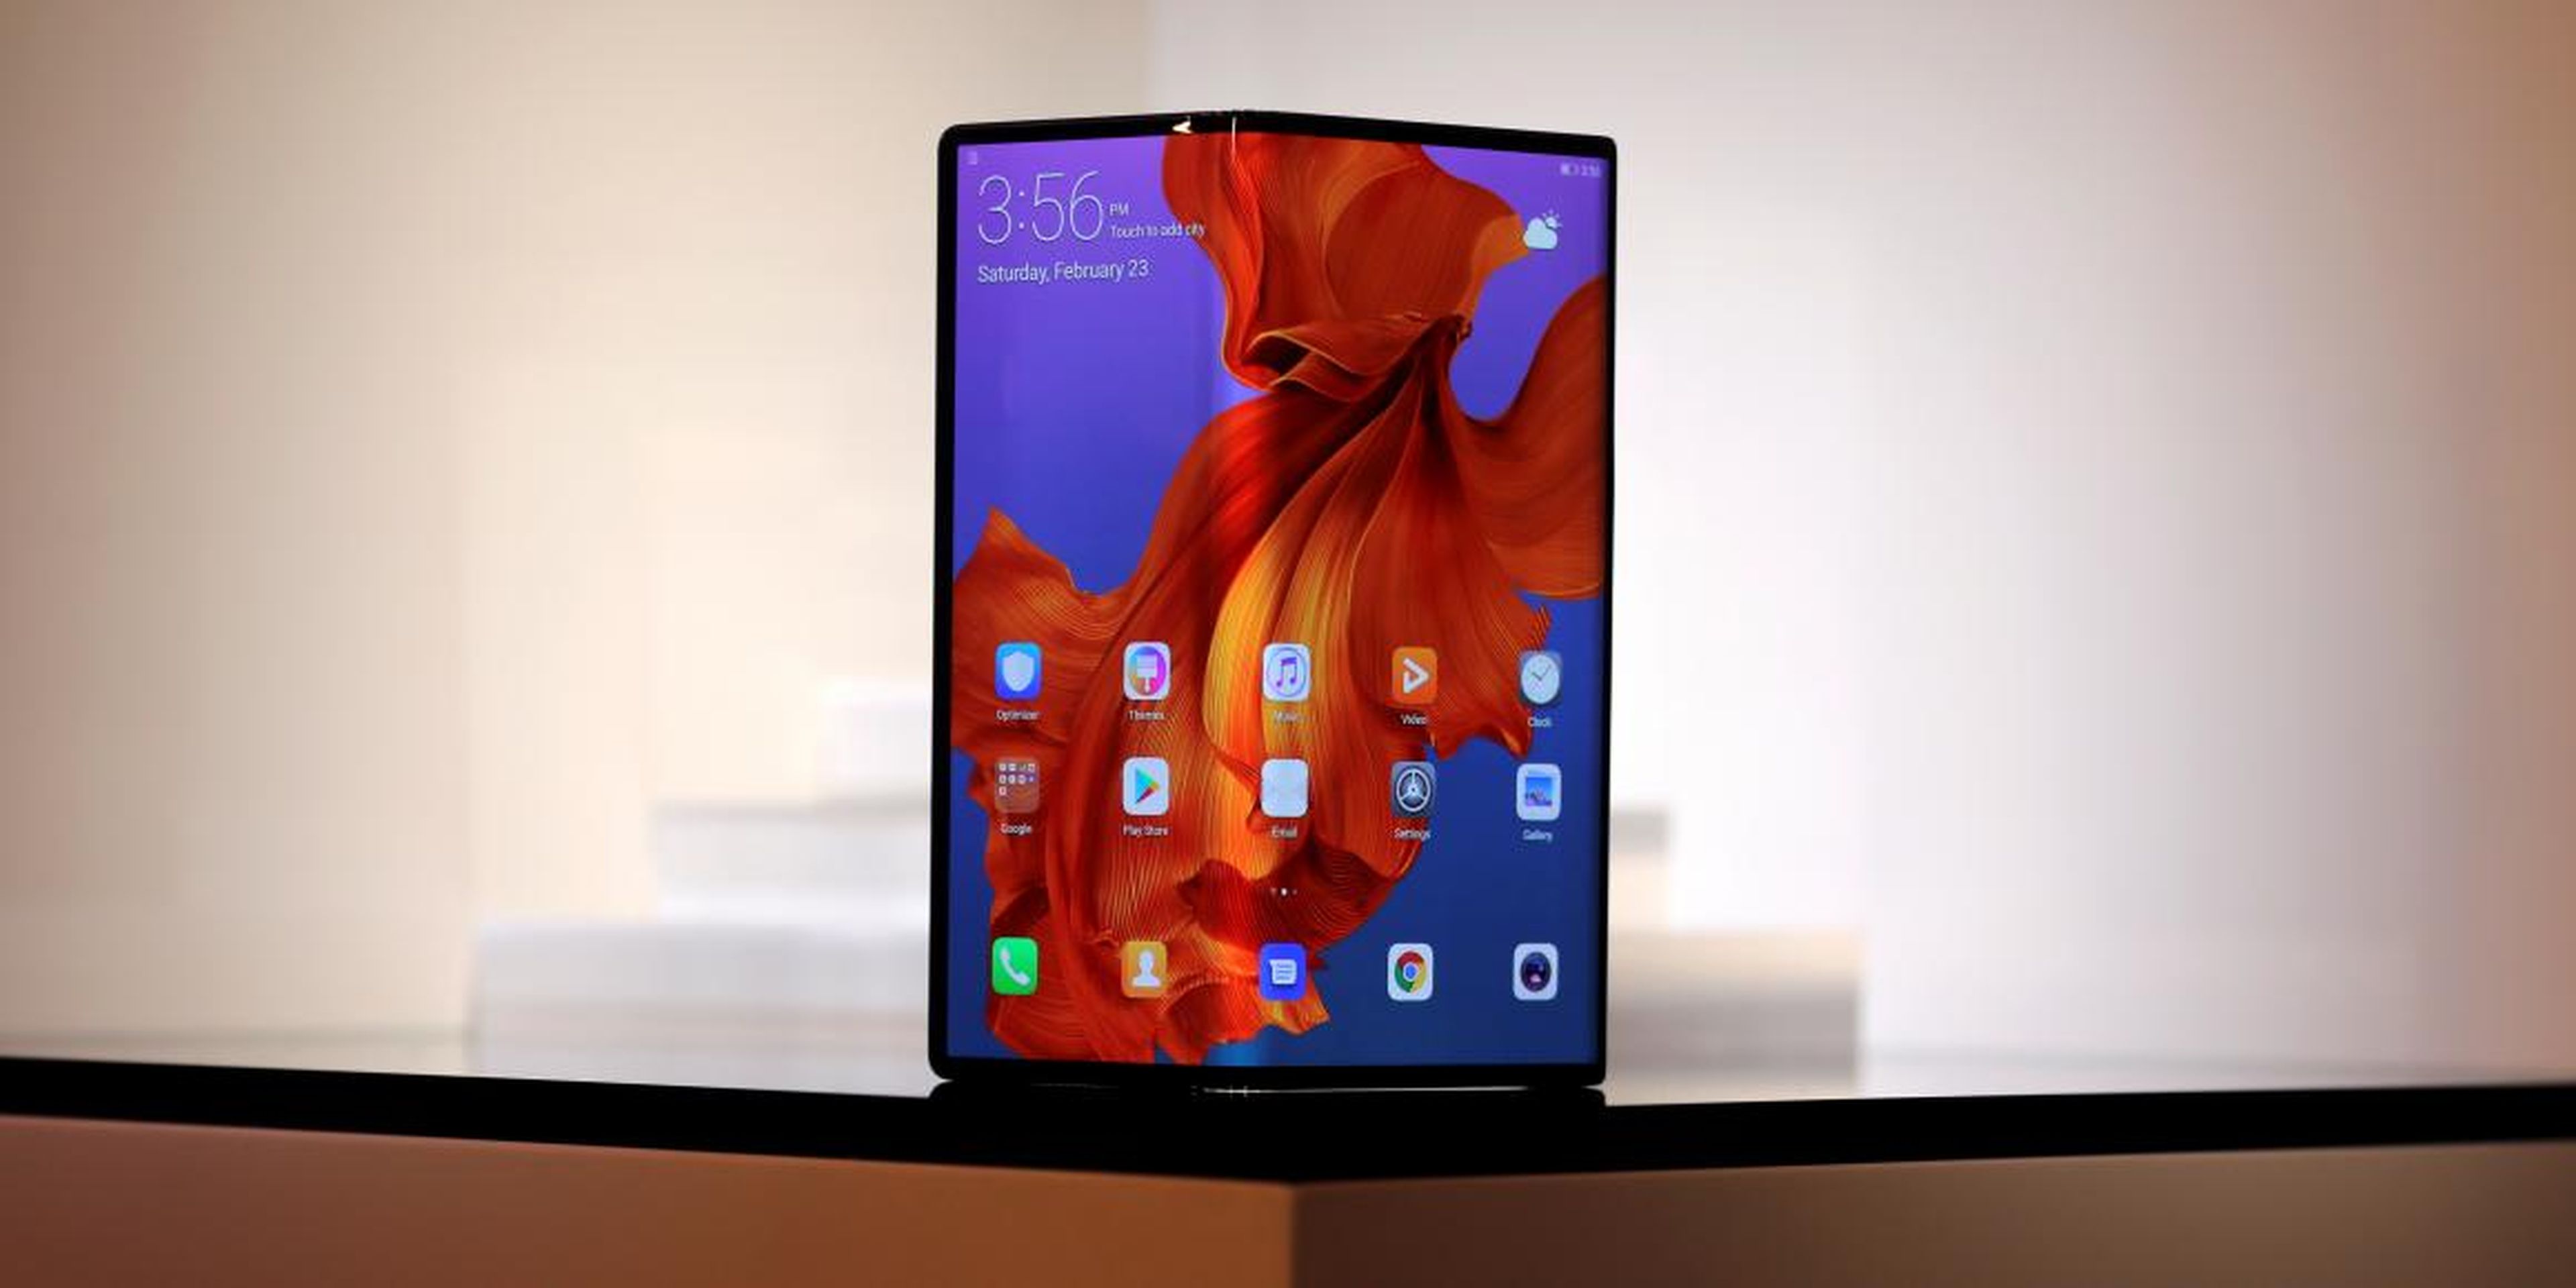 Huawei says Samsung's foldable phone fiasco is one reason why it's being 'cautious' and delaying its own folding smartphone